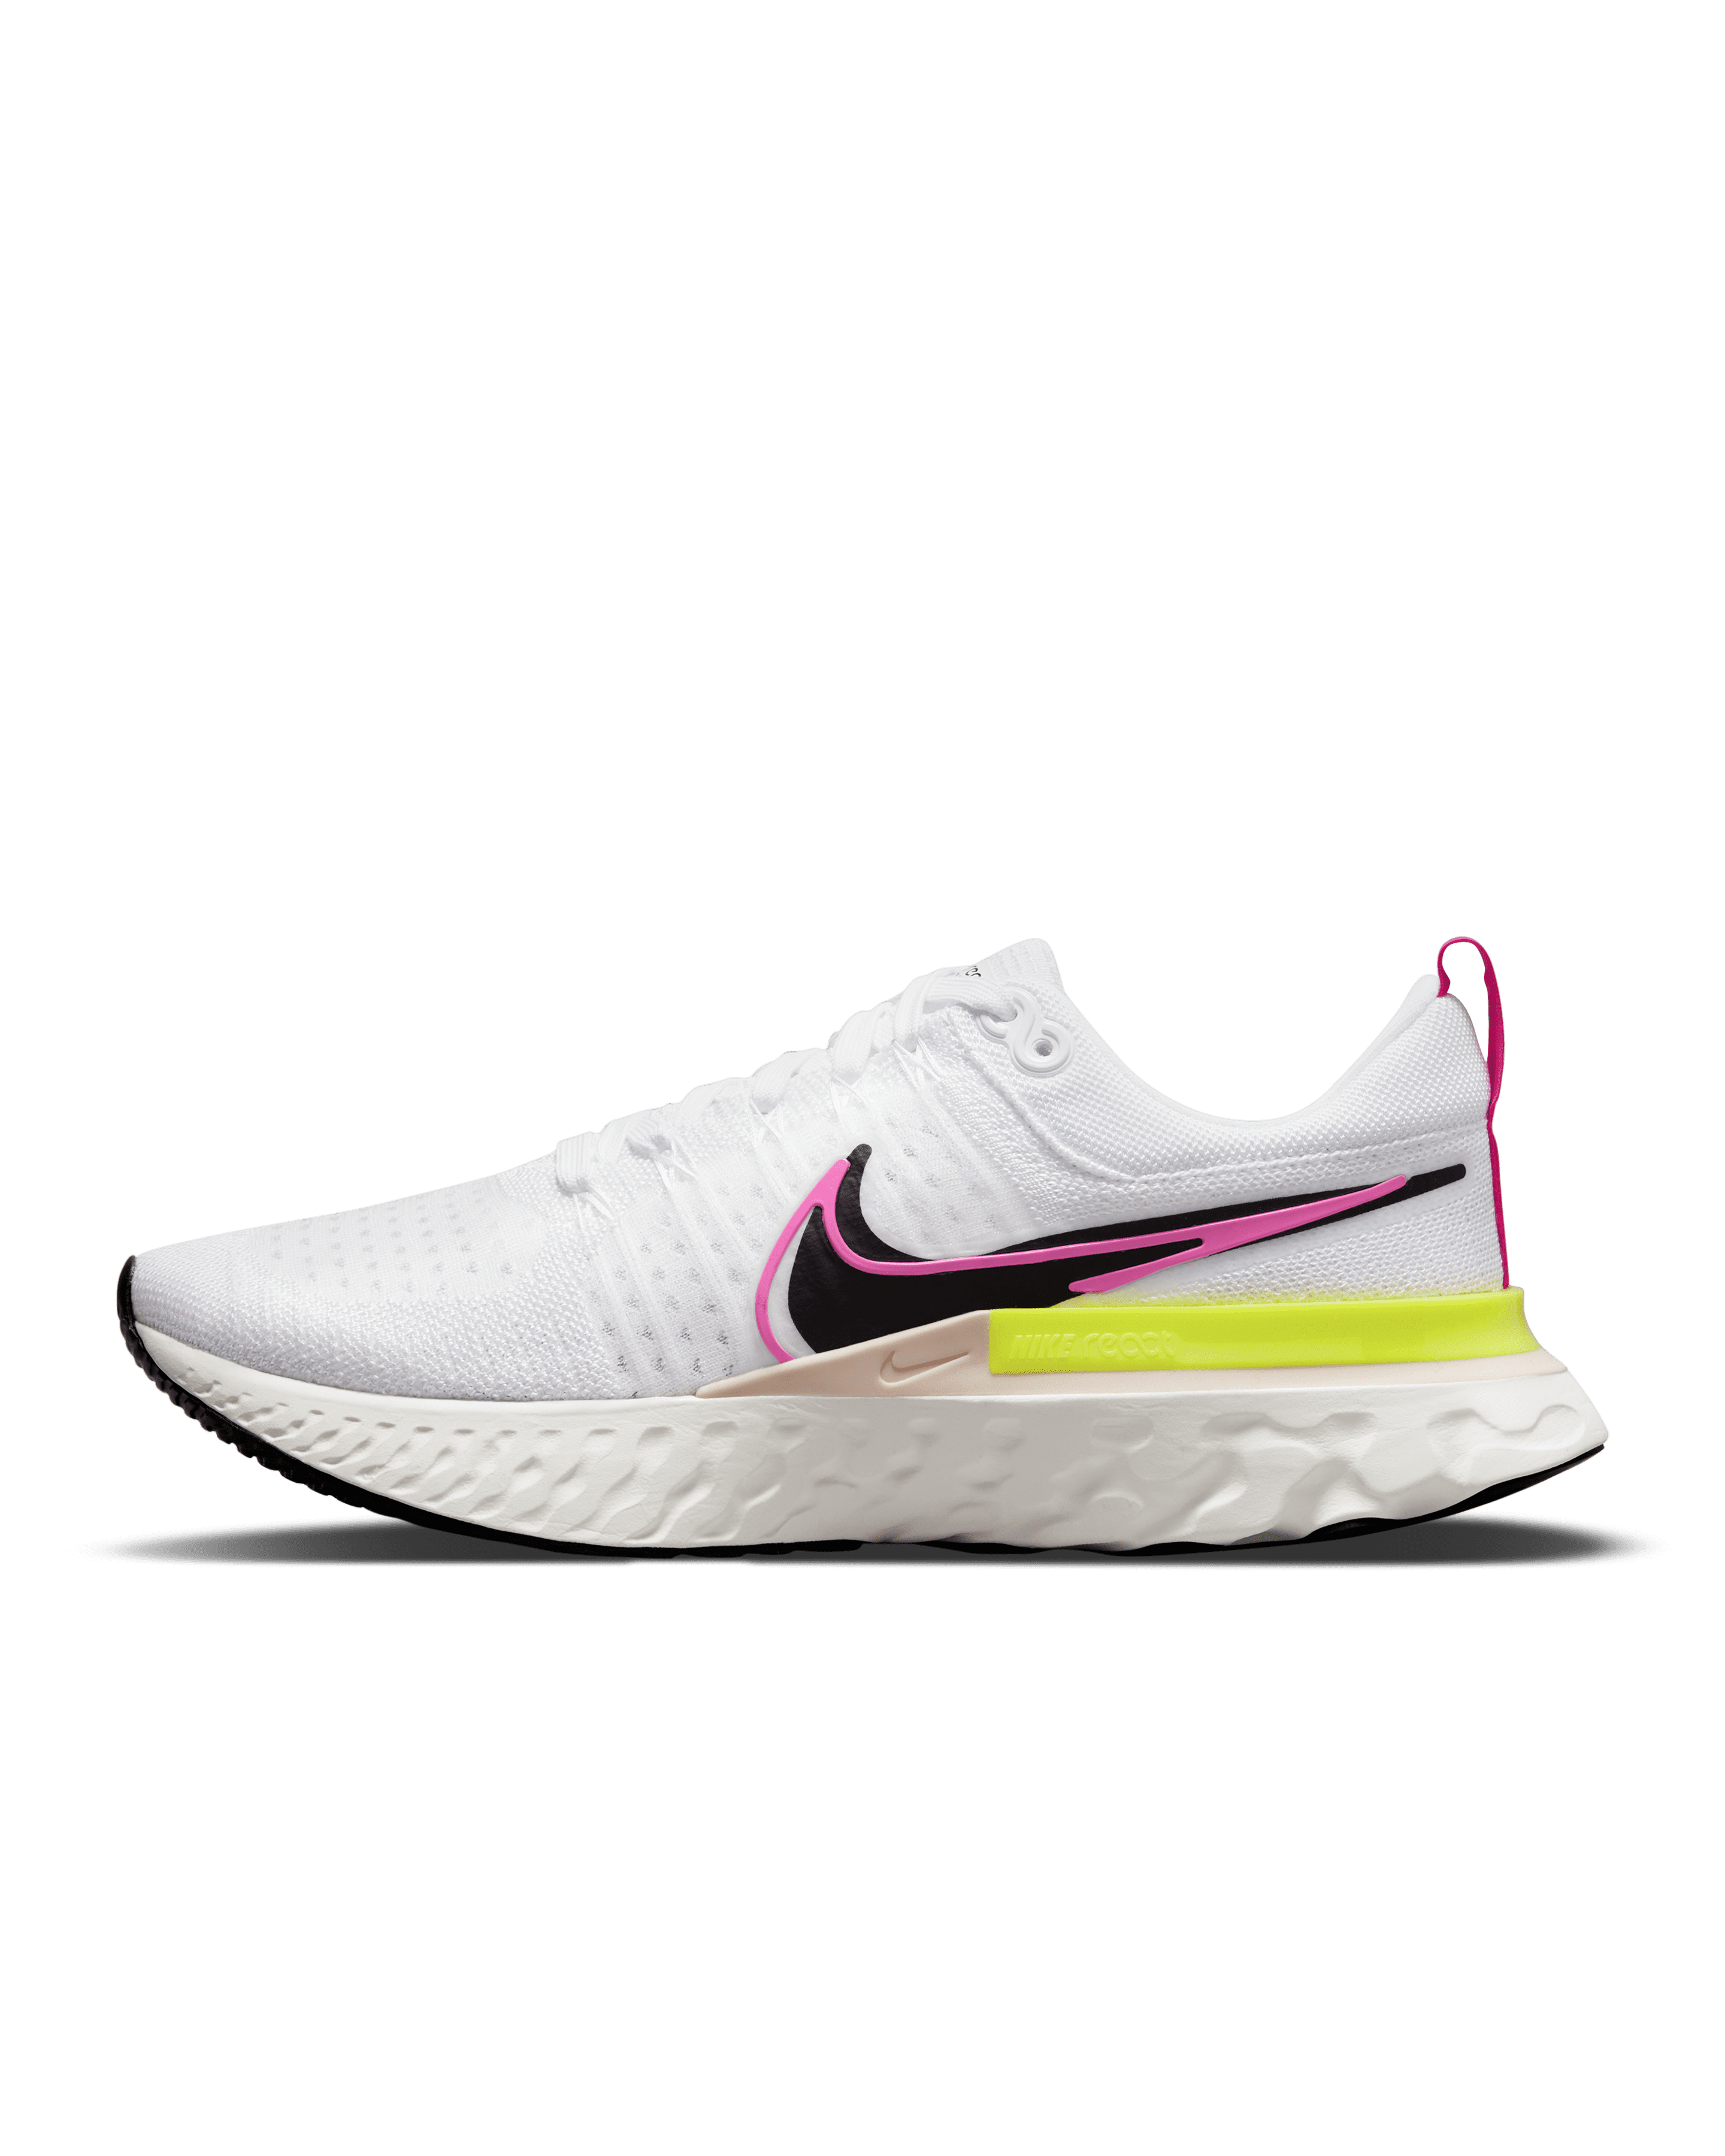 Best Nike running shoes 2023 - as 